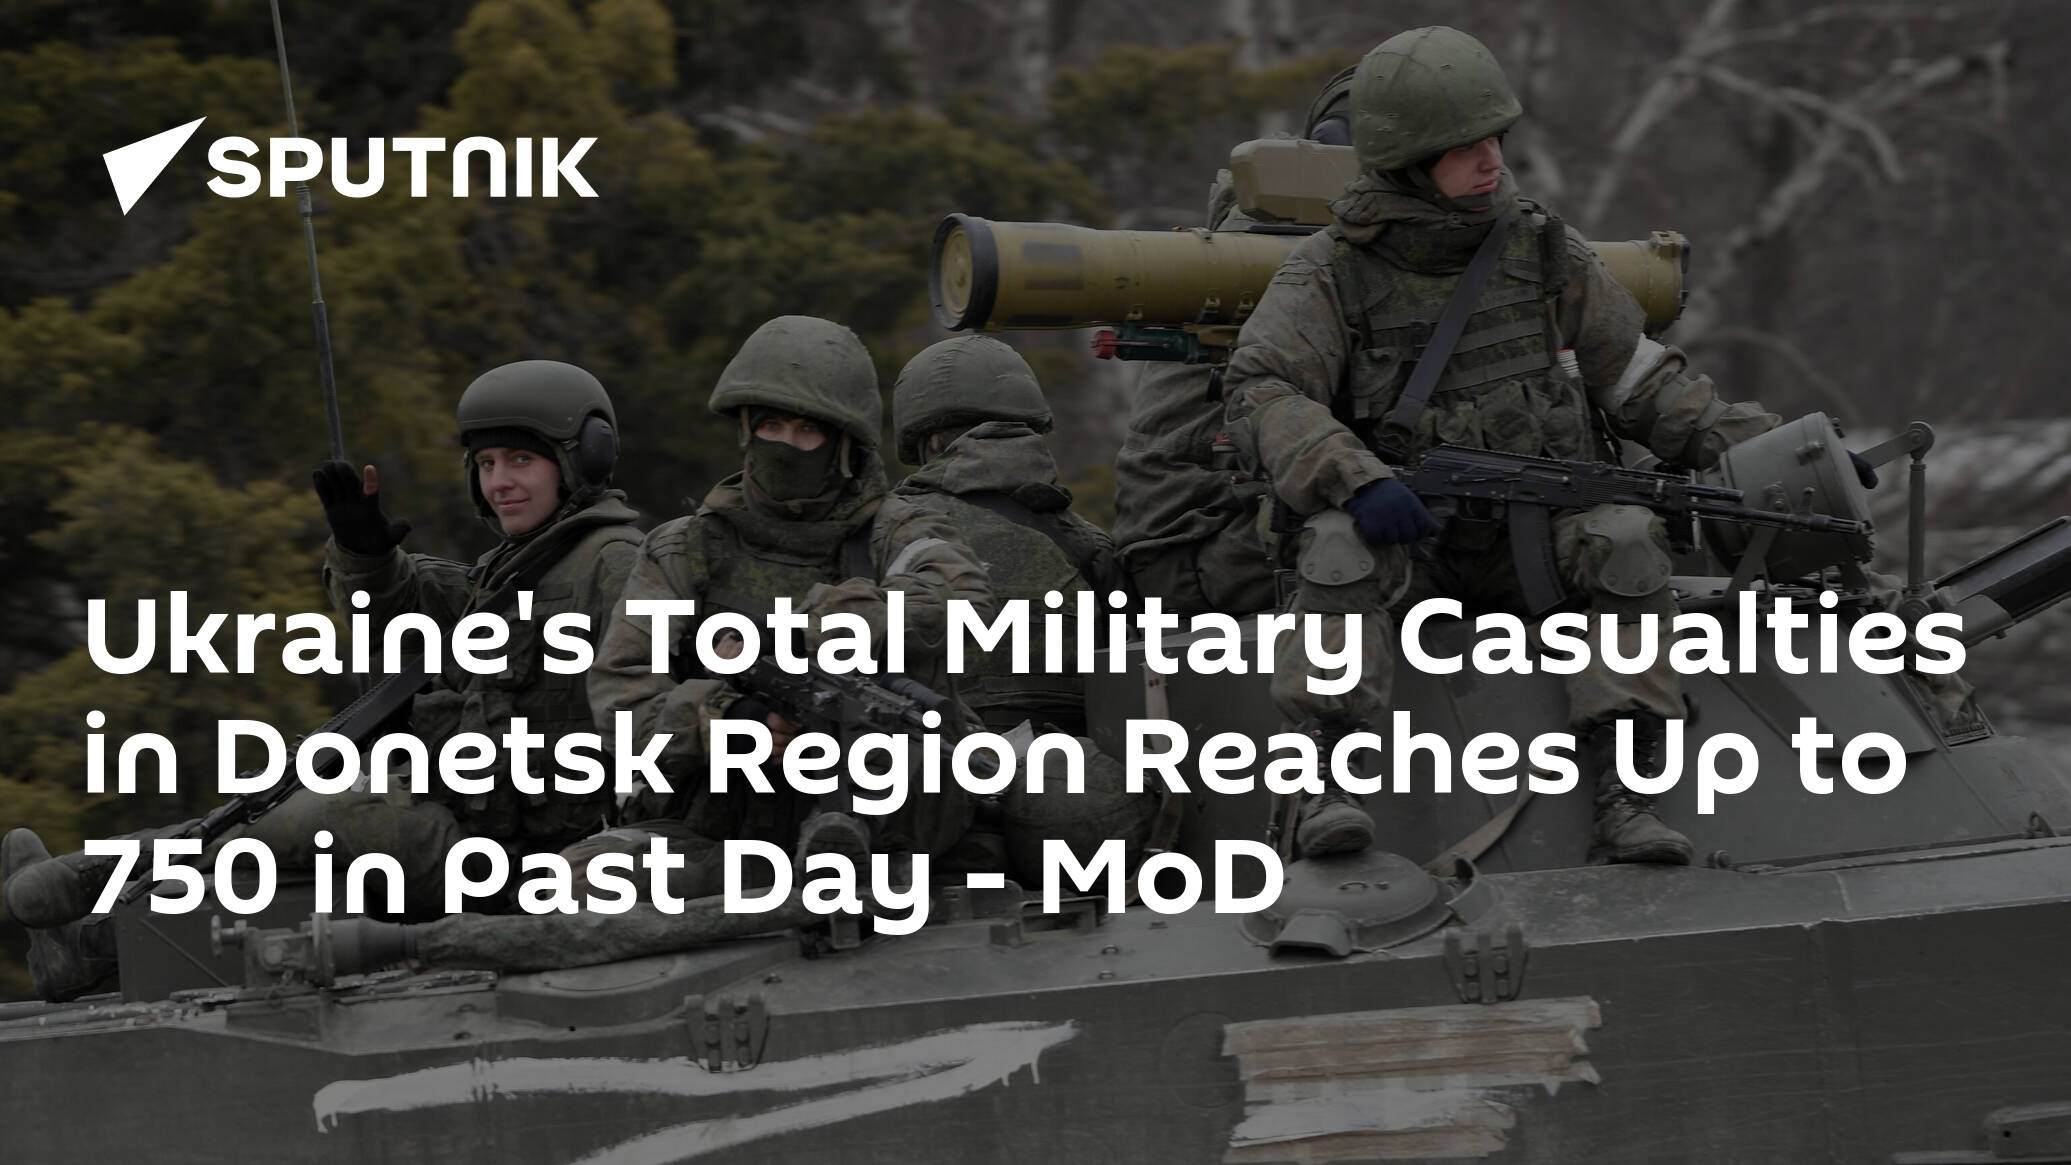 Ukraine's Total Military Casualties in Donetsk Region Reaches Up to 750 in Past Day – MoD